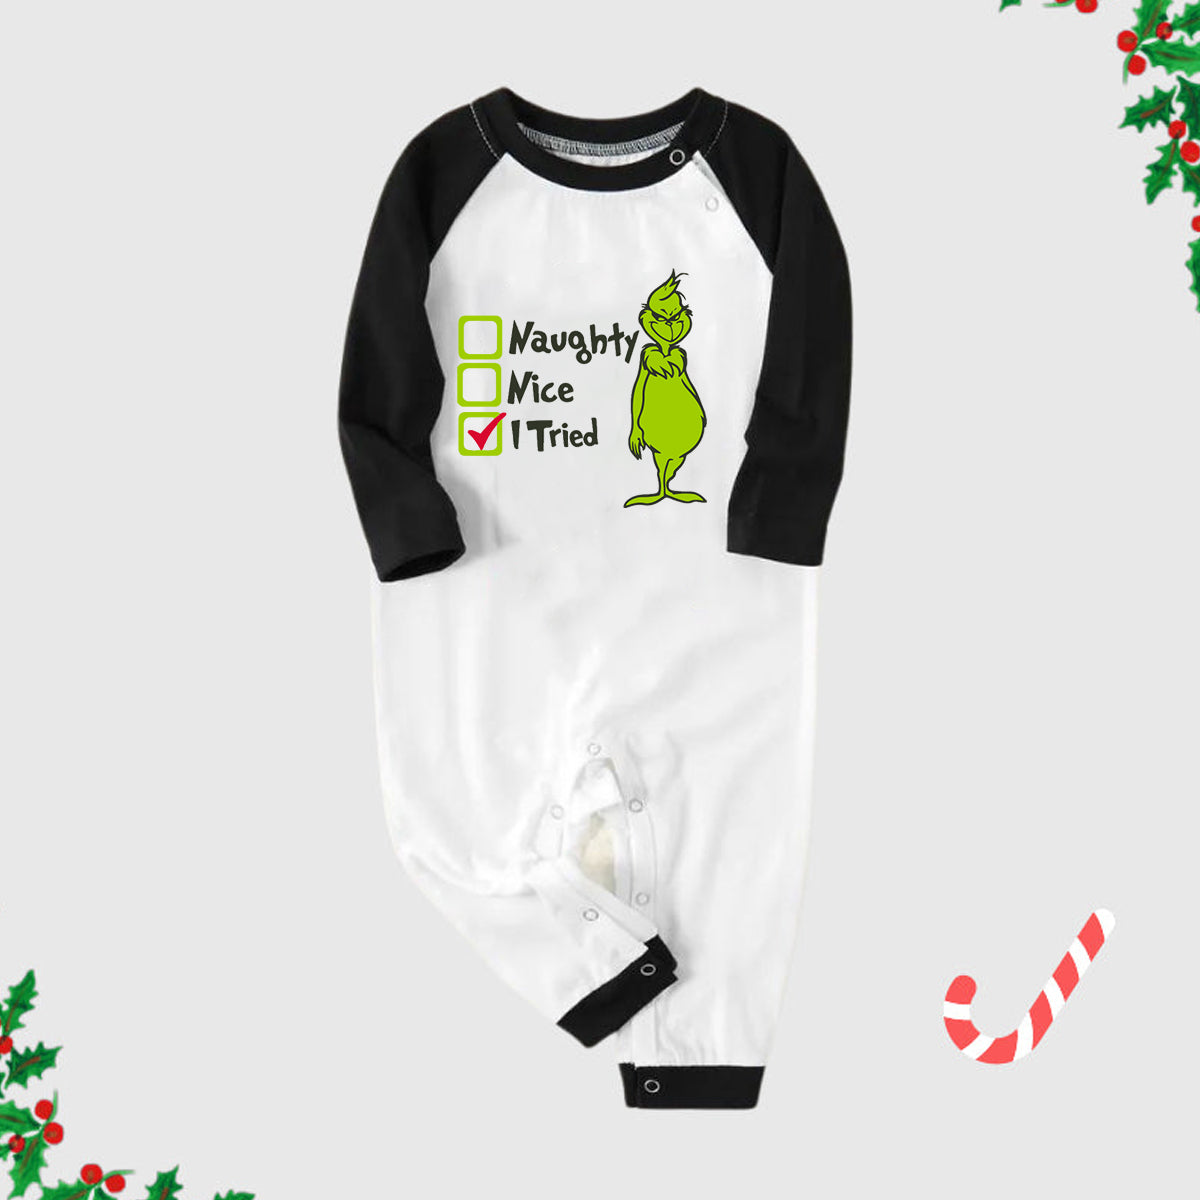 Christmas "Naughty&Nice& I Tried" Letter Print Patterned Casual Long Sleeve Sweatshirts Black Contrast Top and Black and Green Plaid Pants Family Matching Pajamas Sets With Pet Bandana